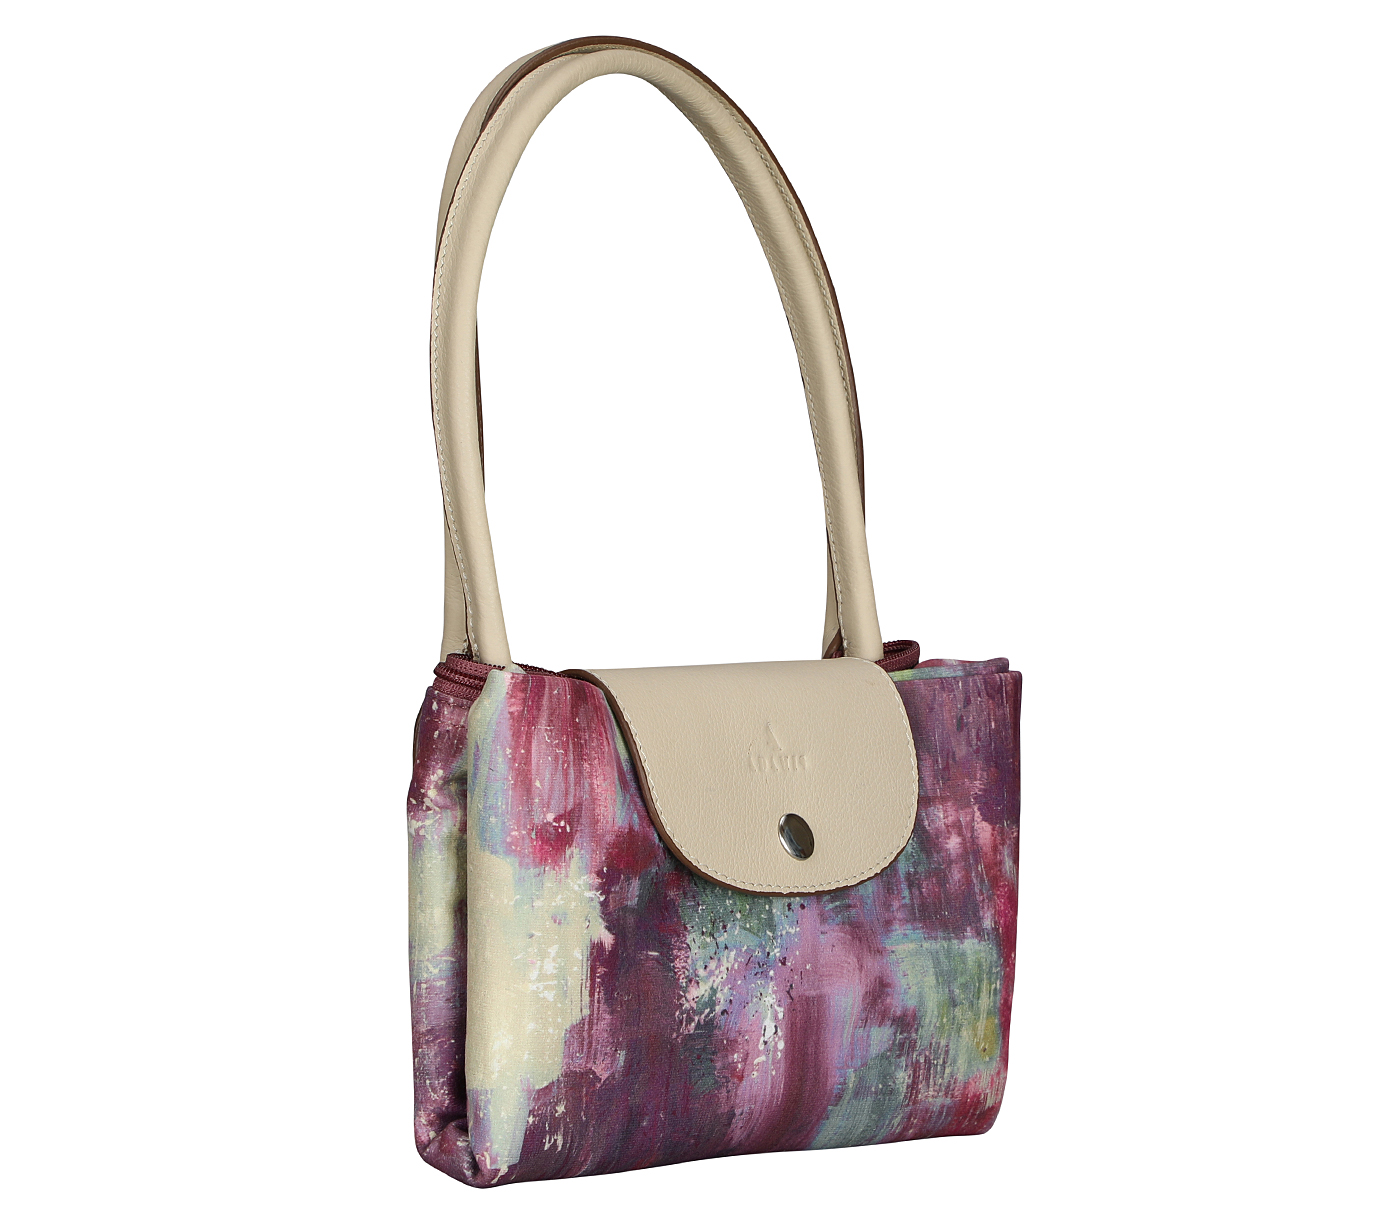 B882--Adelina Folding tote  in leaf print material with genuine leather handles and flap - Wine